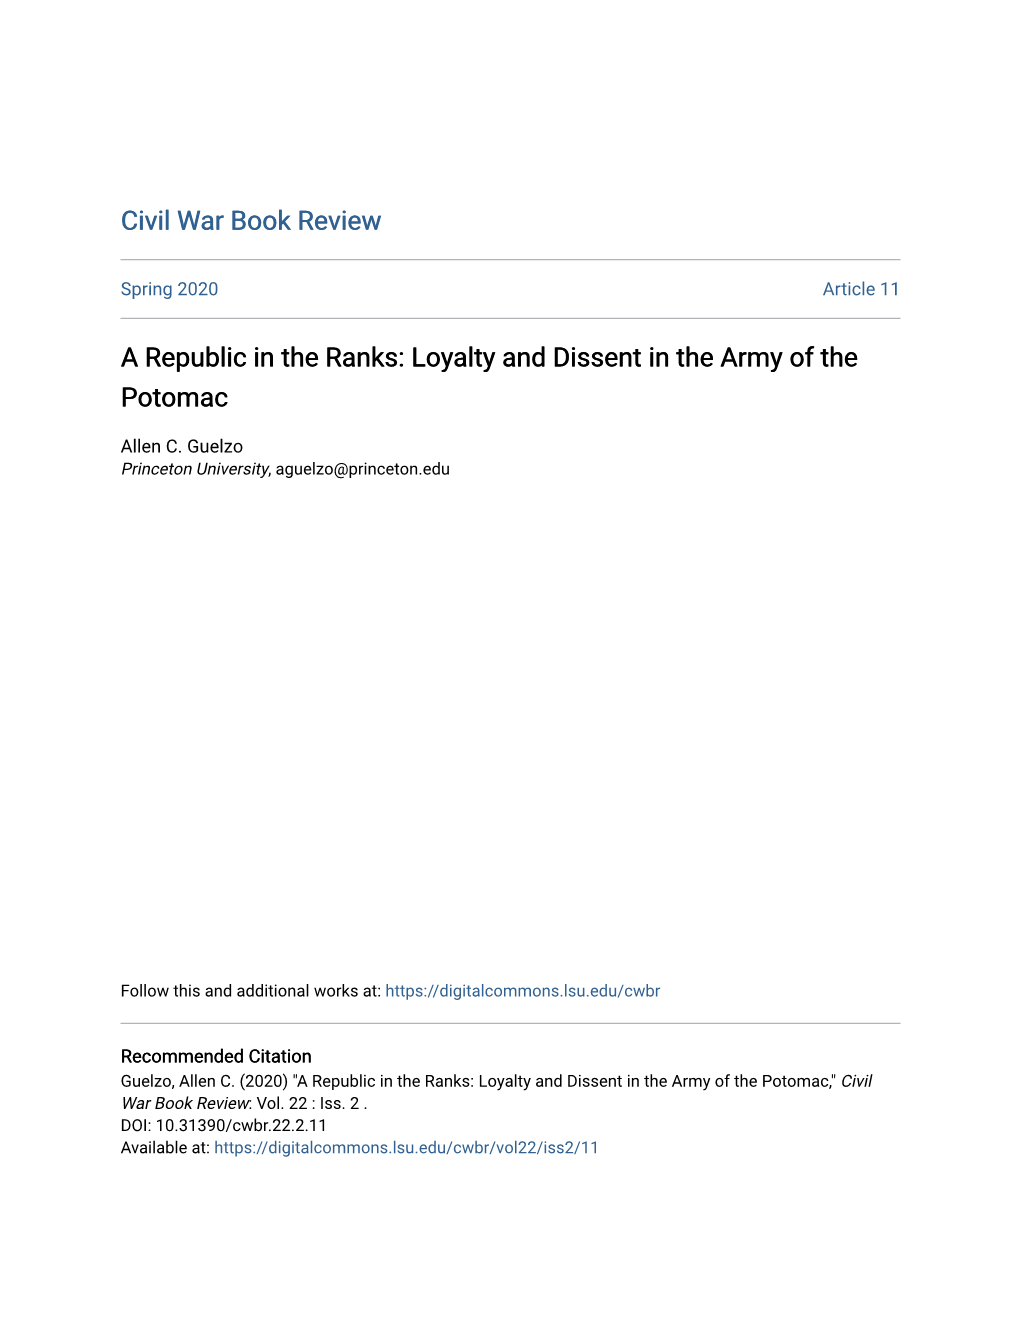 A Republic in the Ranks: Loyalty and Dissent in the Army of the Potomac